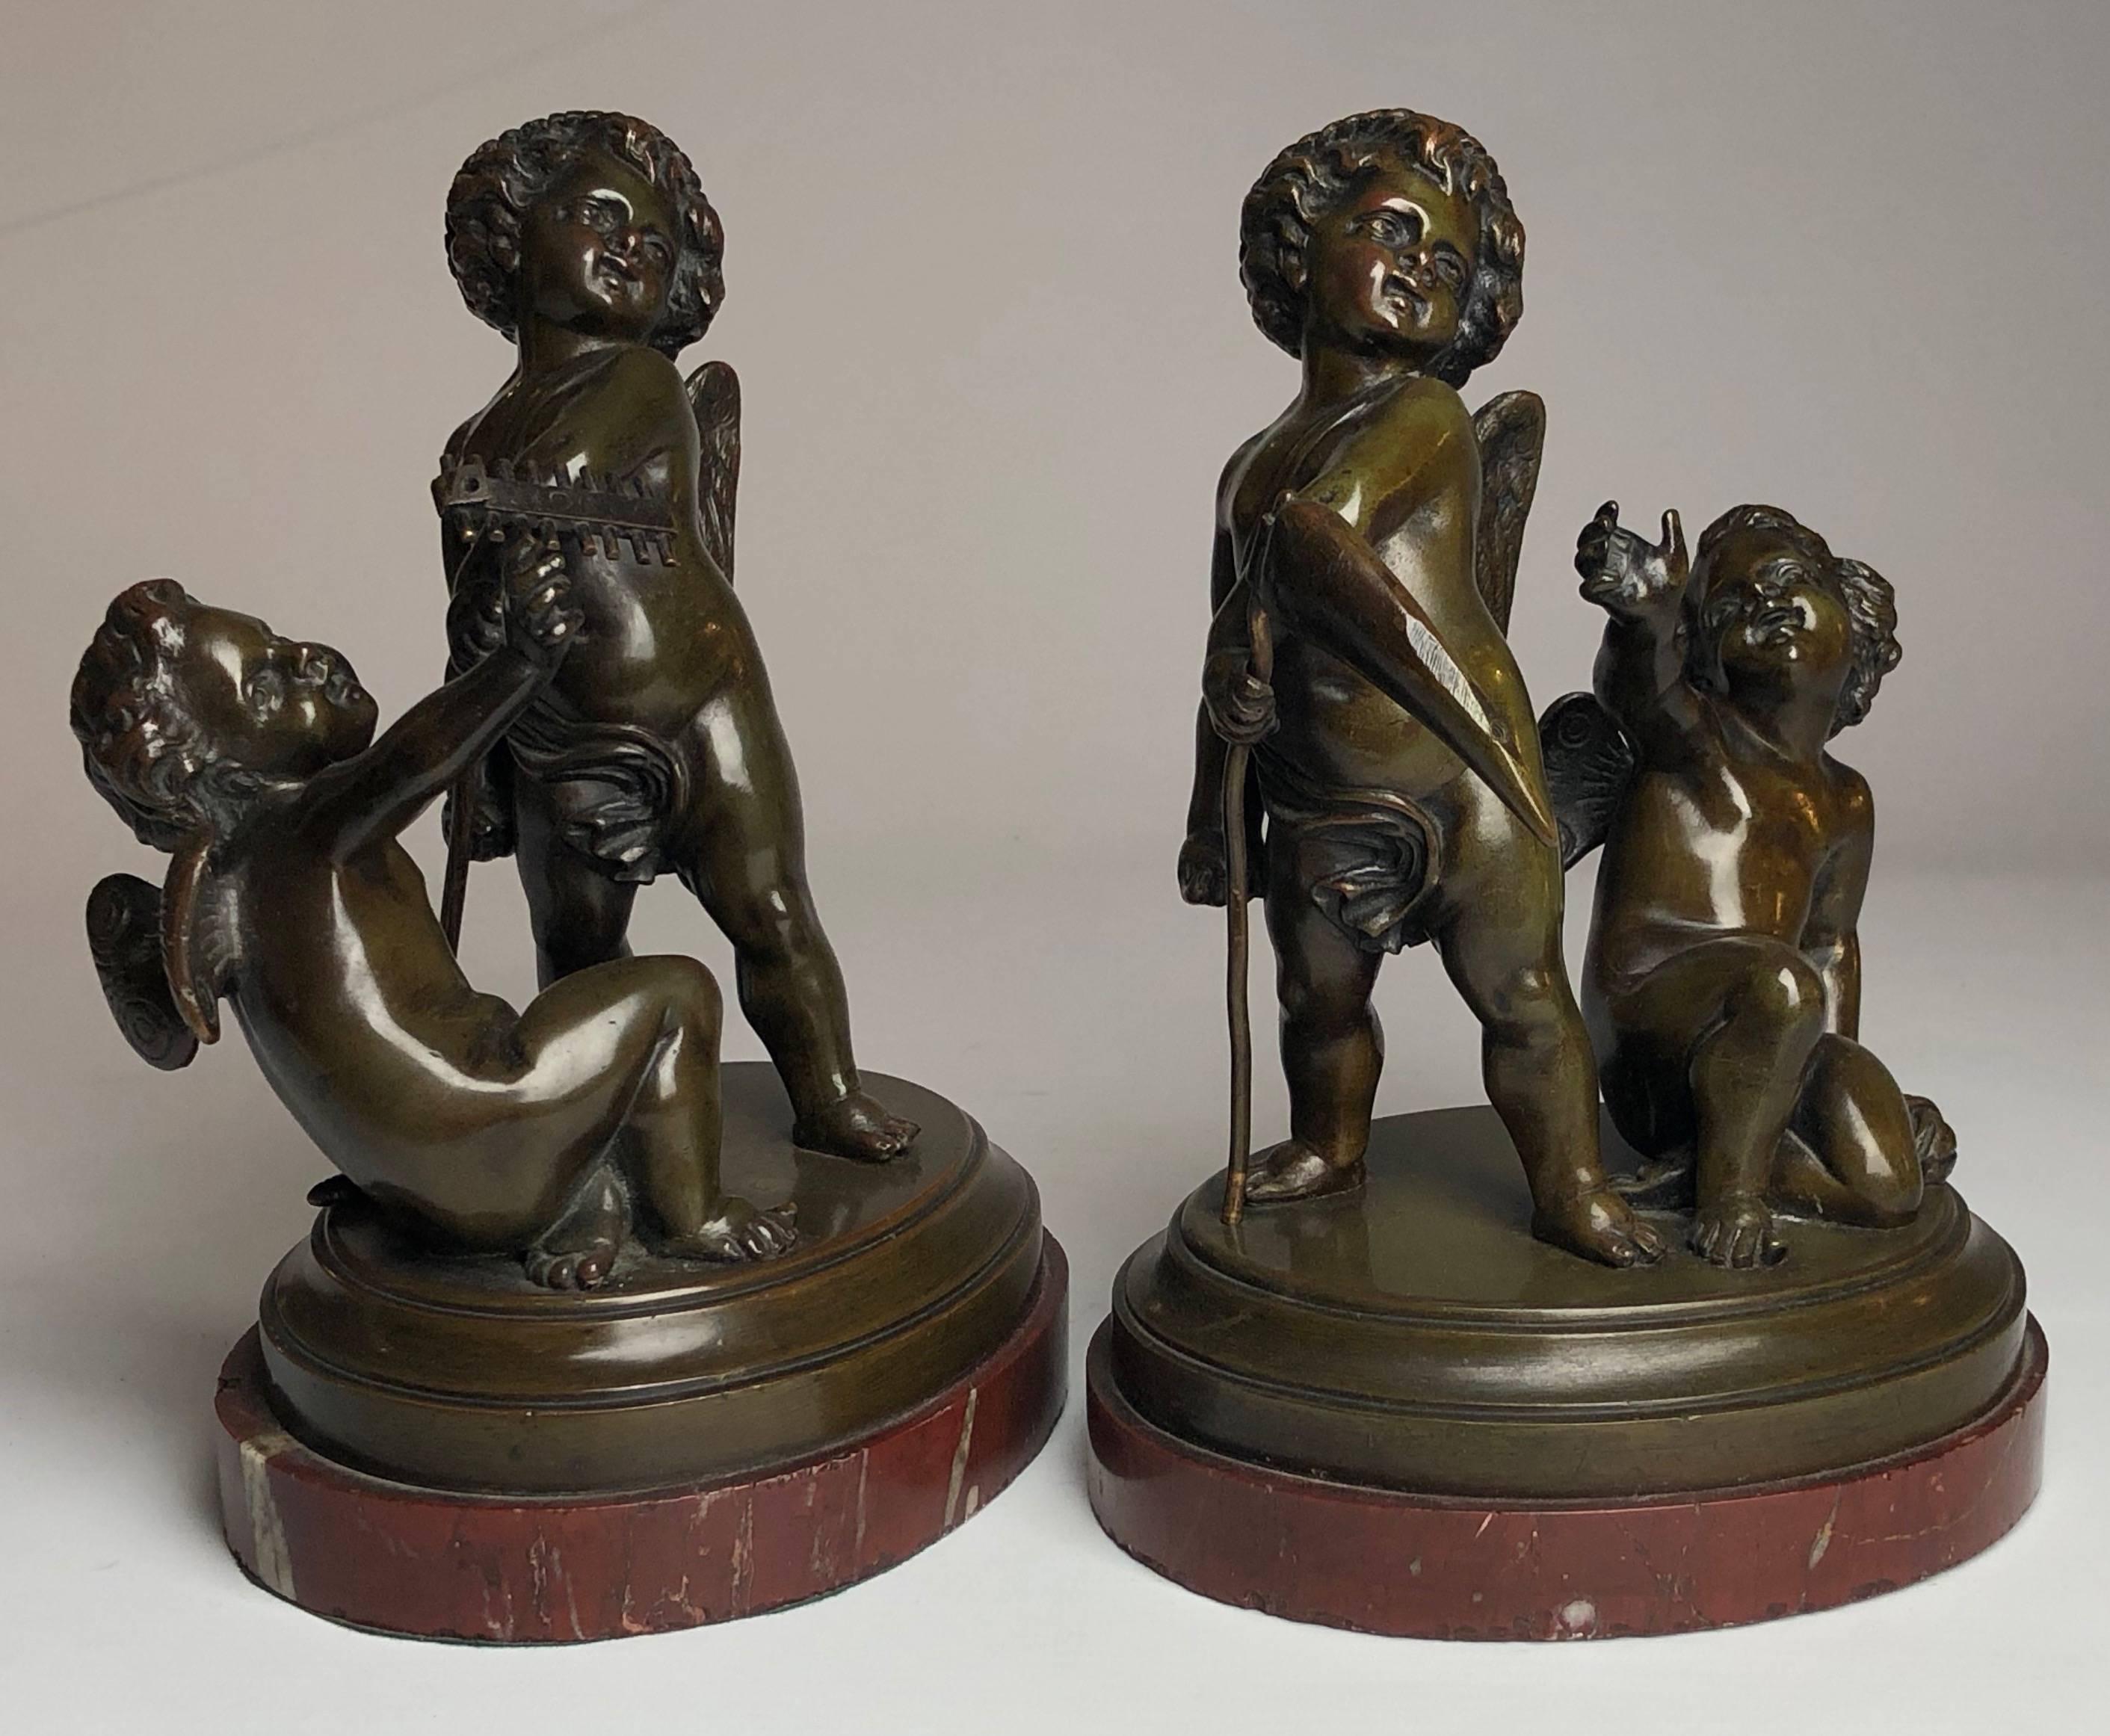 Very good quality pair of cherub bronzes. Both sat on original reuge marble bases

French 

circa 1870

each measure 5